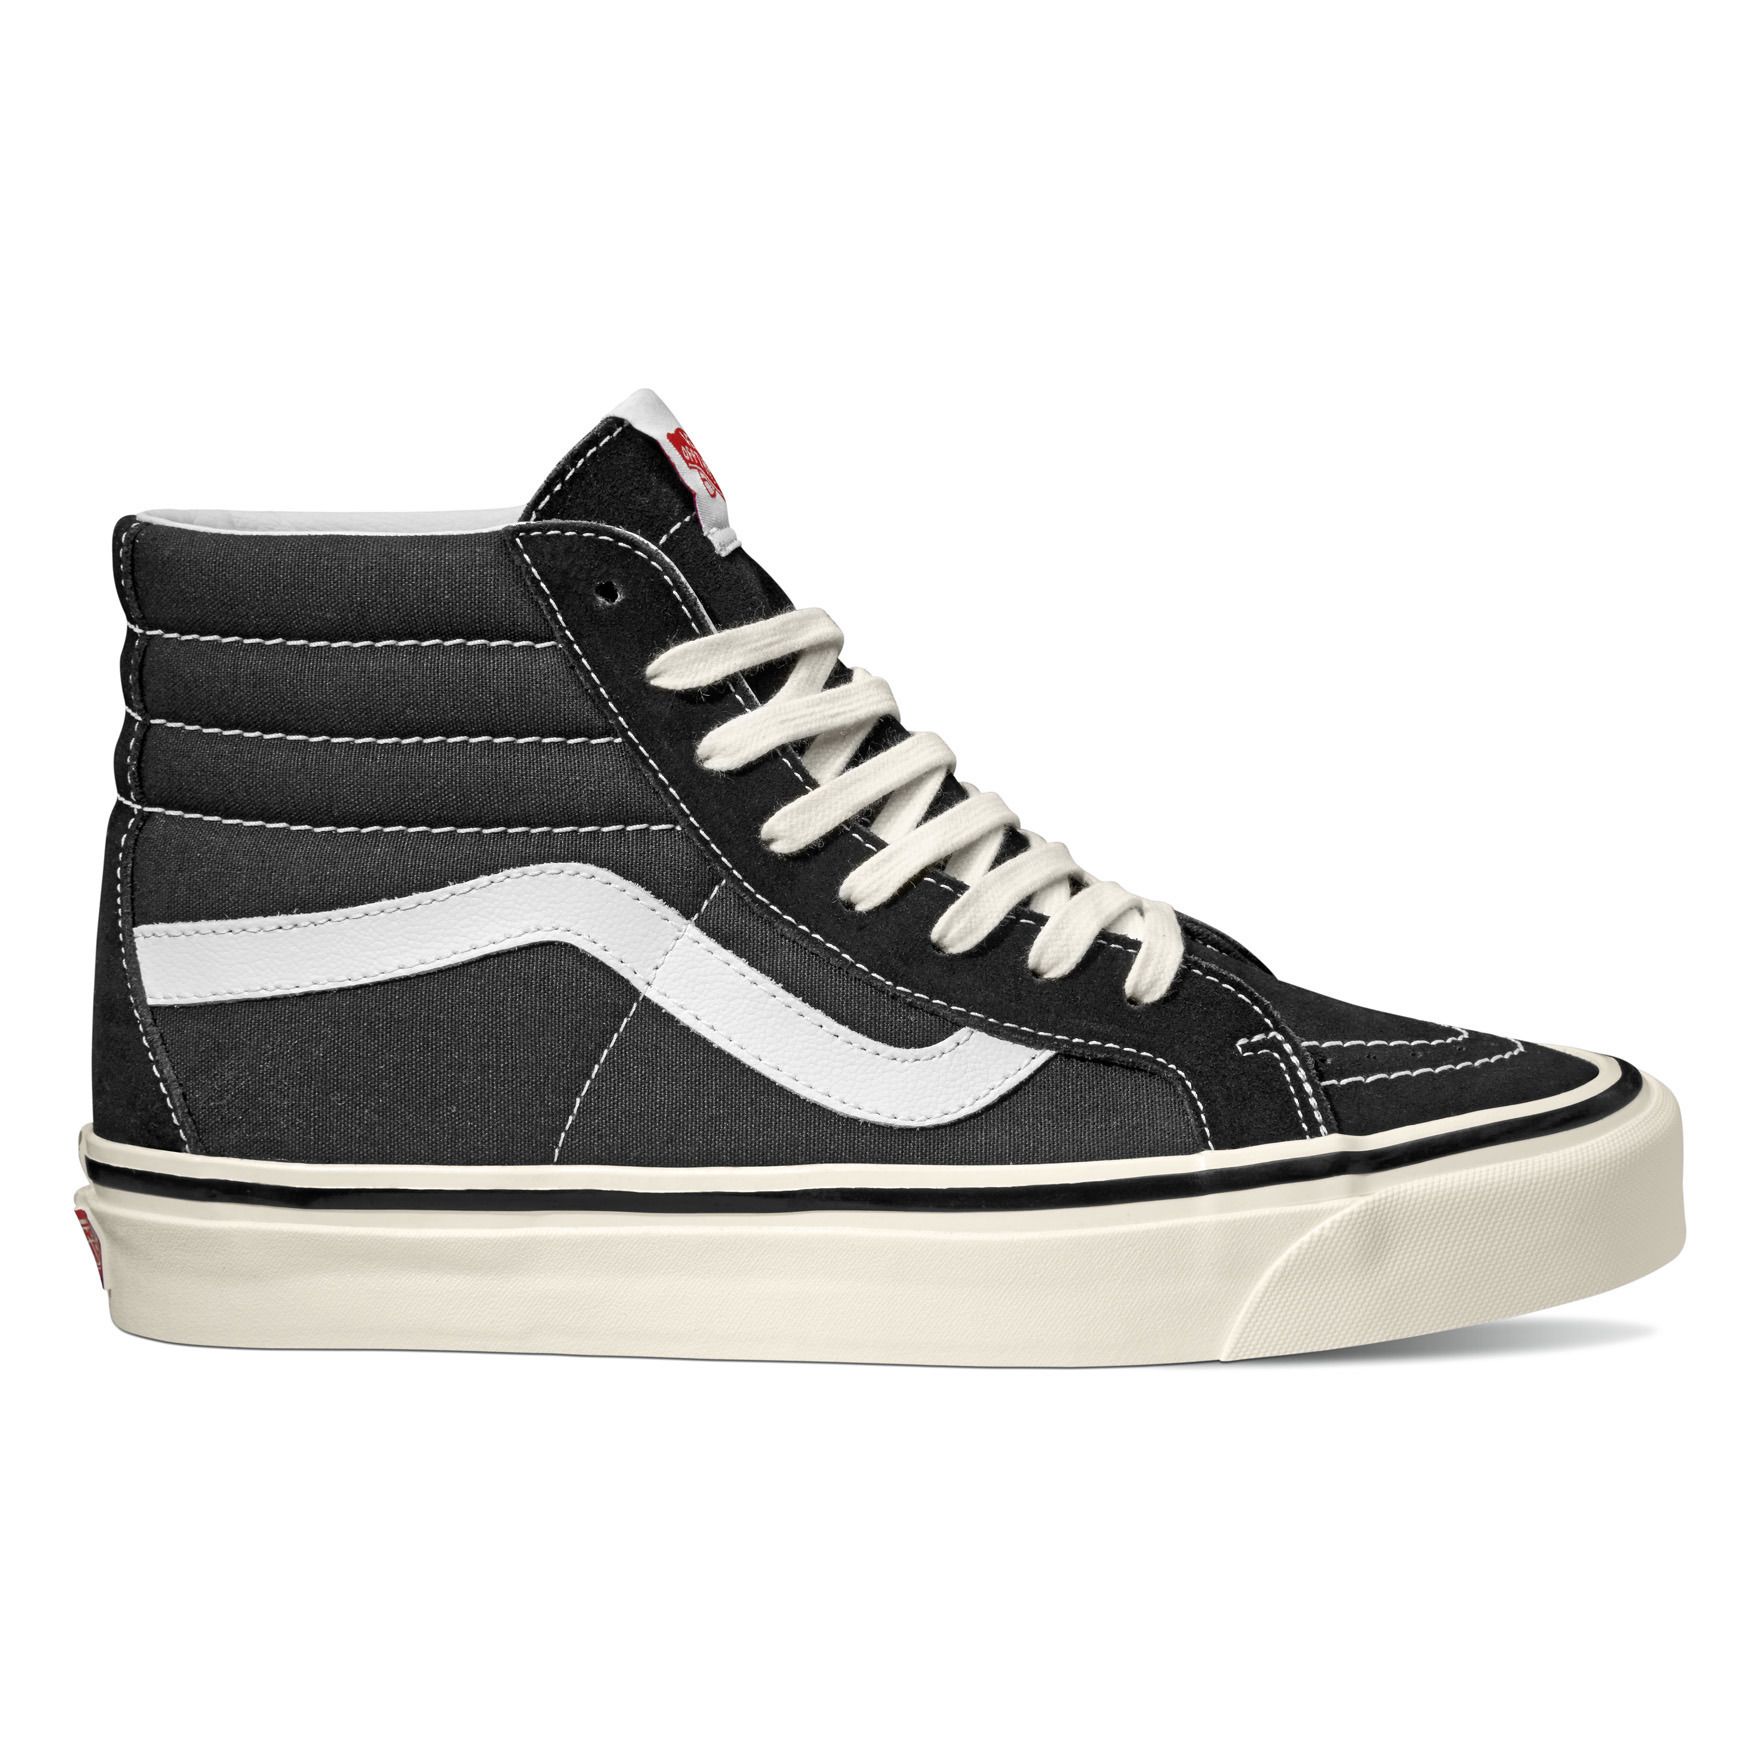 Vans I New Collection I Smallable